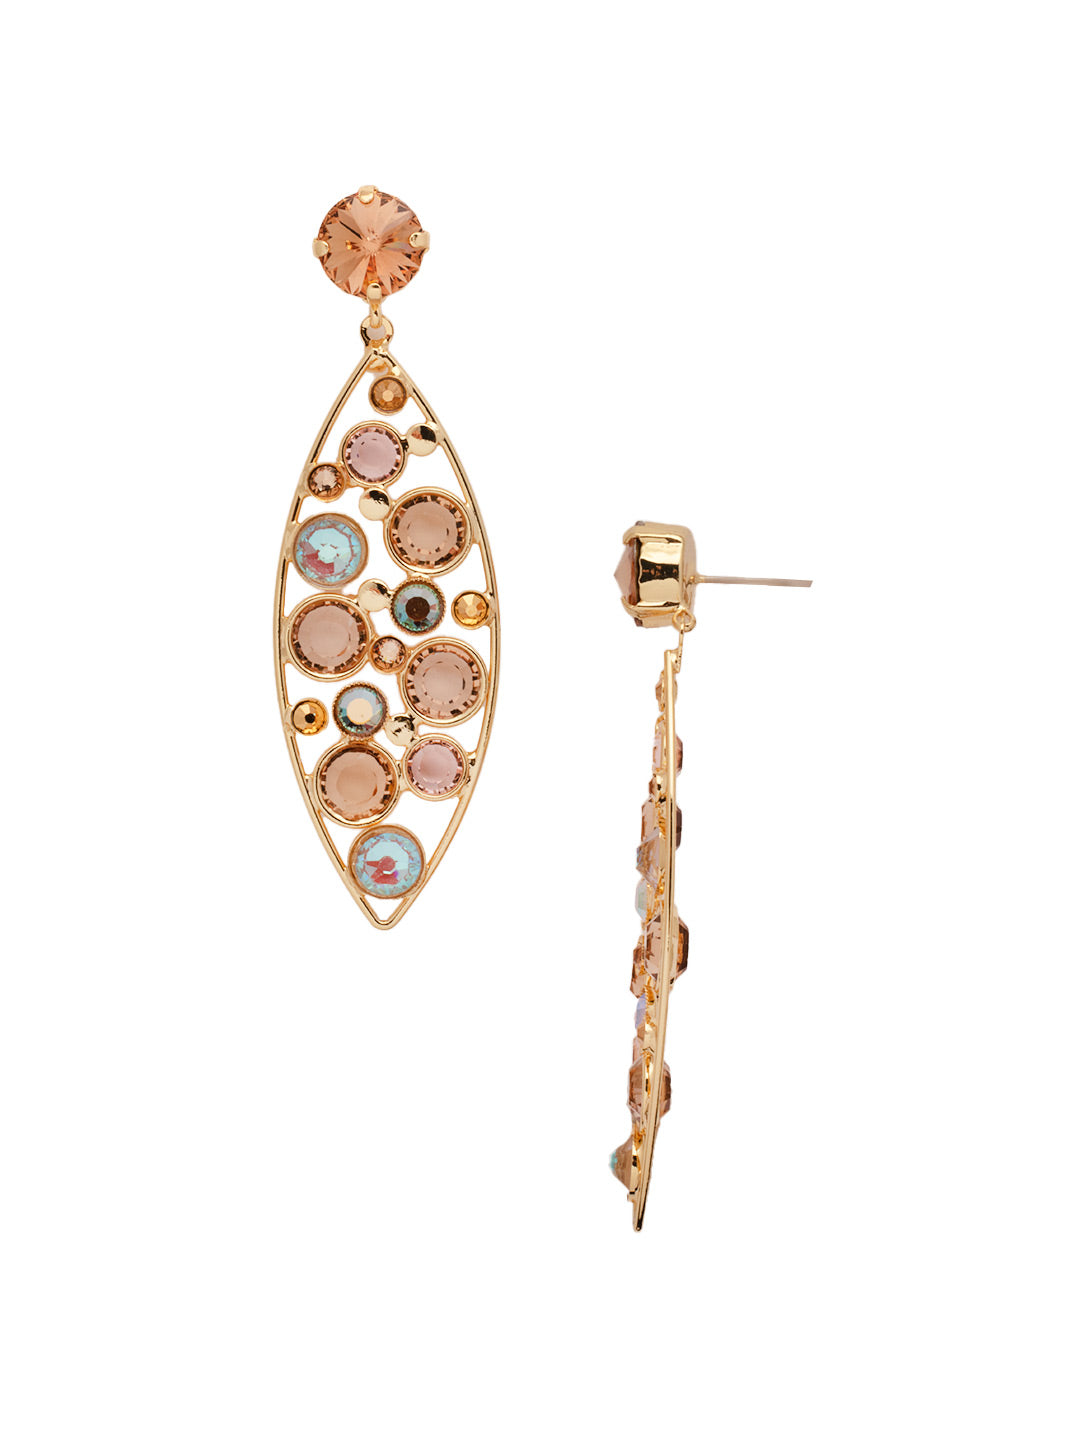 Charlene Statement Earring - EFC53BGRSU - <p>The Charlene Statement Earrings feature delicate crystal channels nestled in an oblong metal hoop, dangling from a round cut crystal stud. From Sorrelli's Raw Sugar collection in our Bright Gold-tone finish.</p>